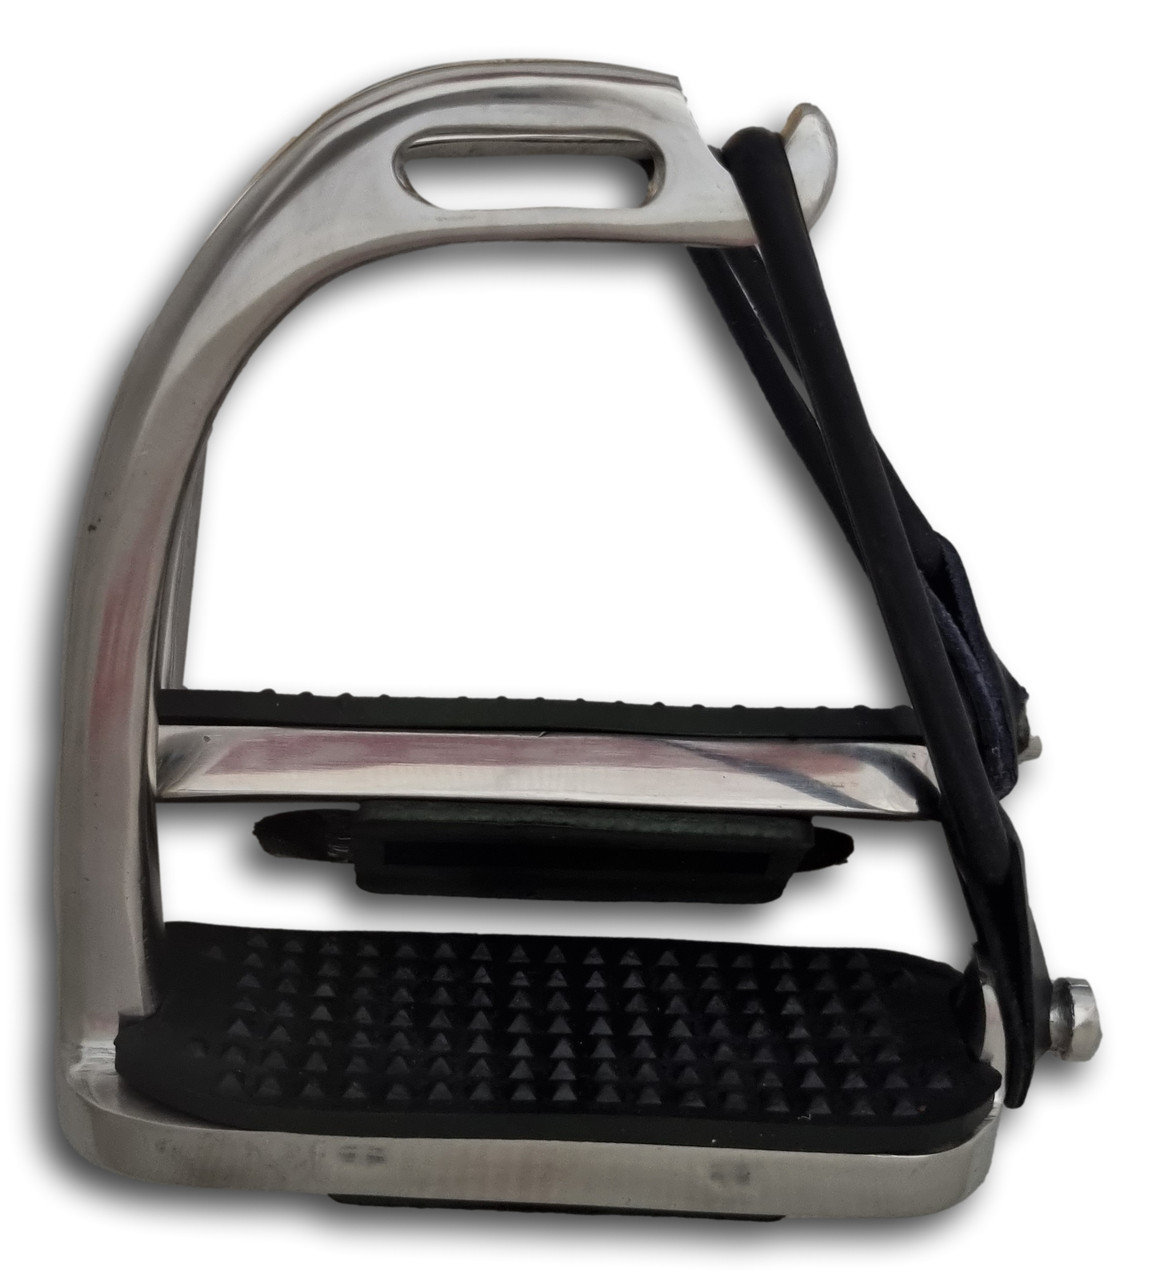 PEACOCK STIRRUPS HORSE EQUESTRIAN SAFETY NON- RUSTY STIRRUPS